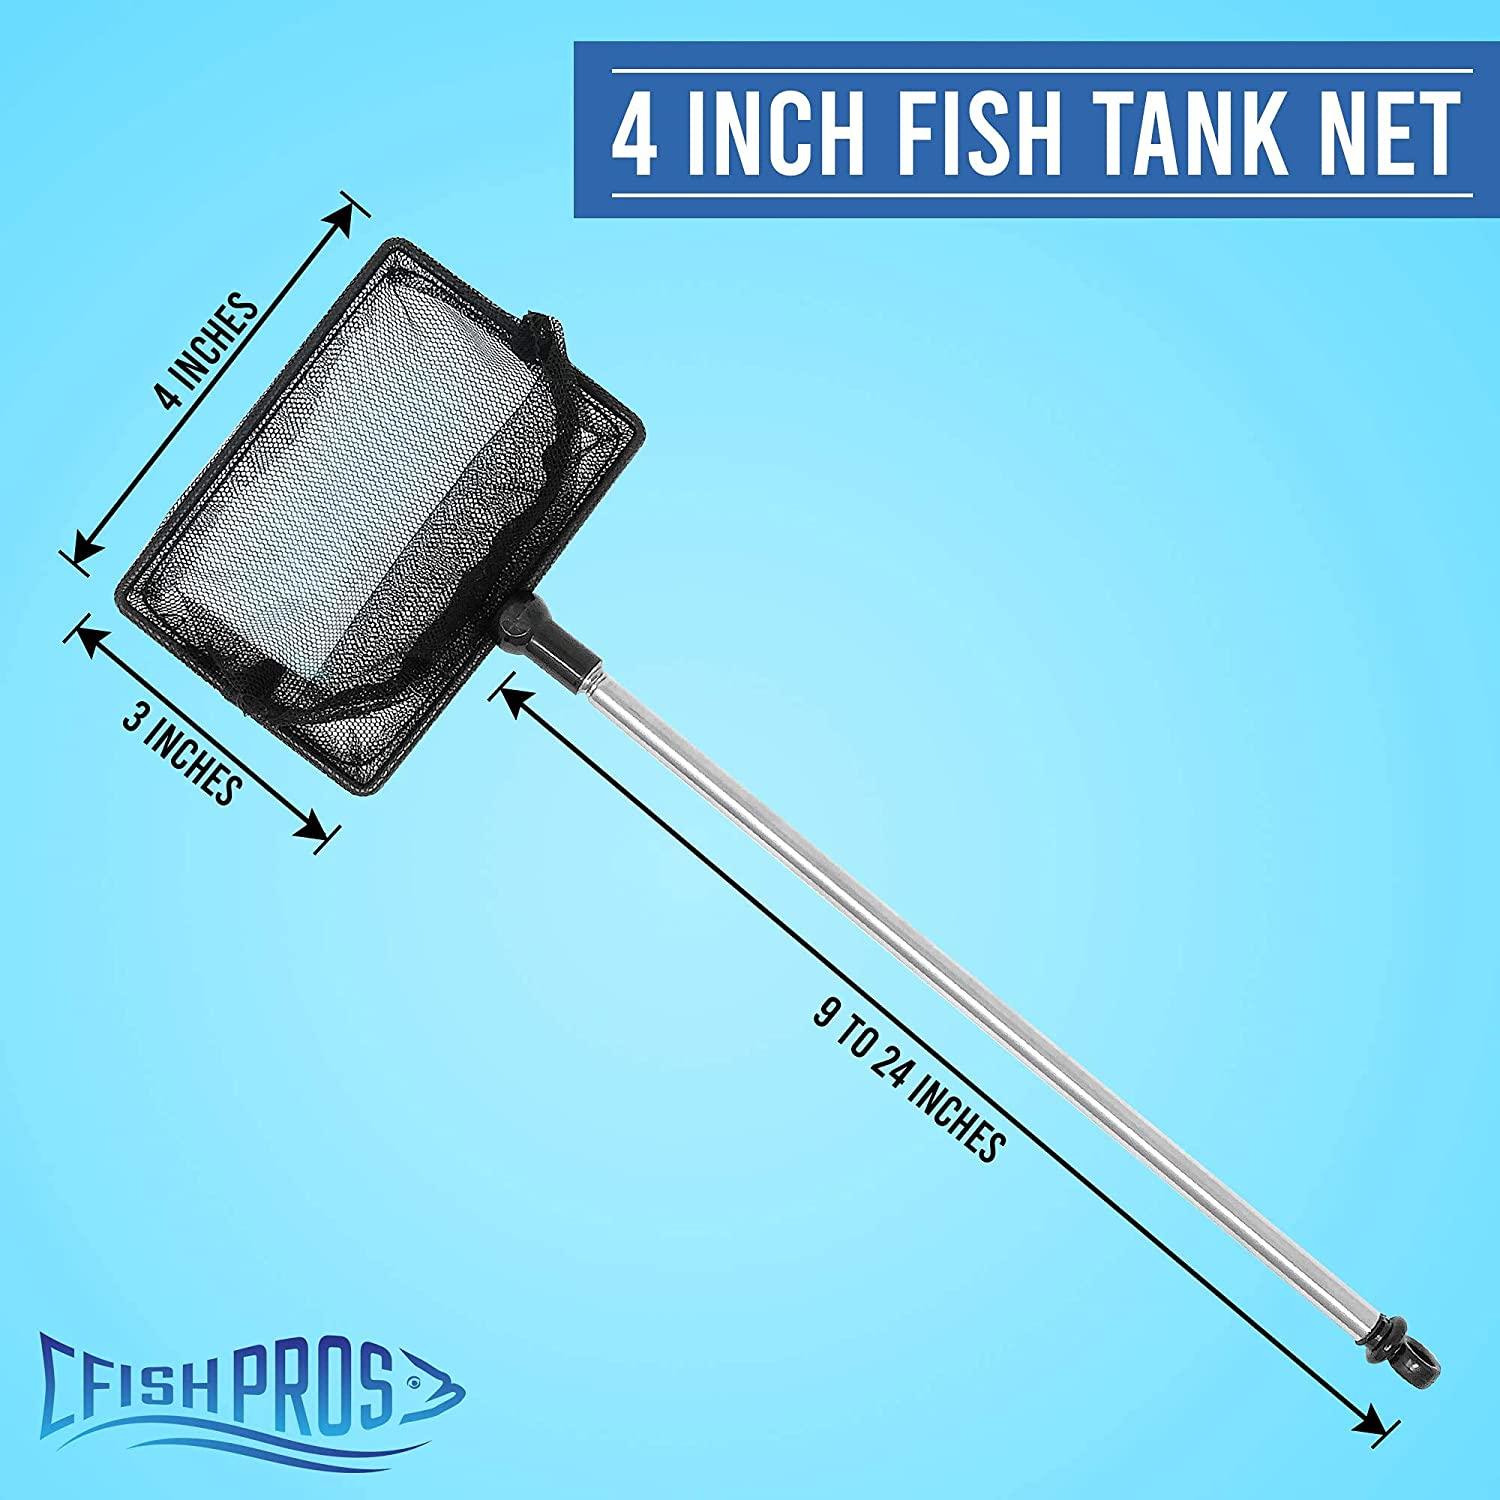 FISH PROS Fish Net for Fish Tank, 2.5 Inch Deep Mesh Scooper with Extendable  Handle up to 24 Inches Long Large Scoop, Telescopic Pond Skimmer Nets for  Cleaning Tanks as Aquarium Accessories